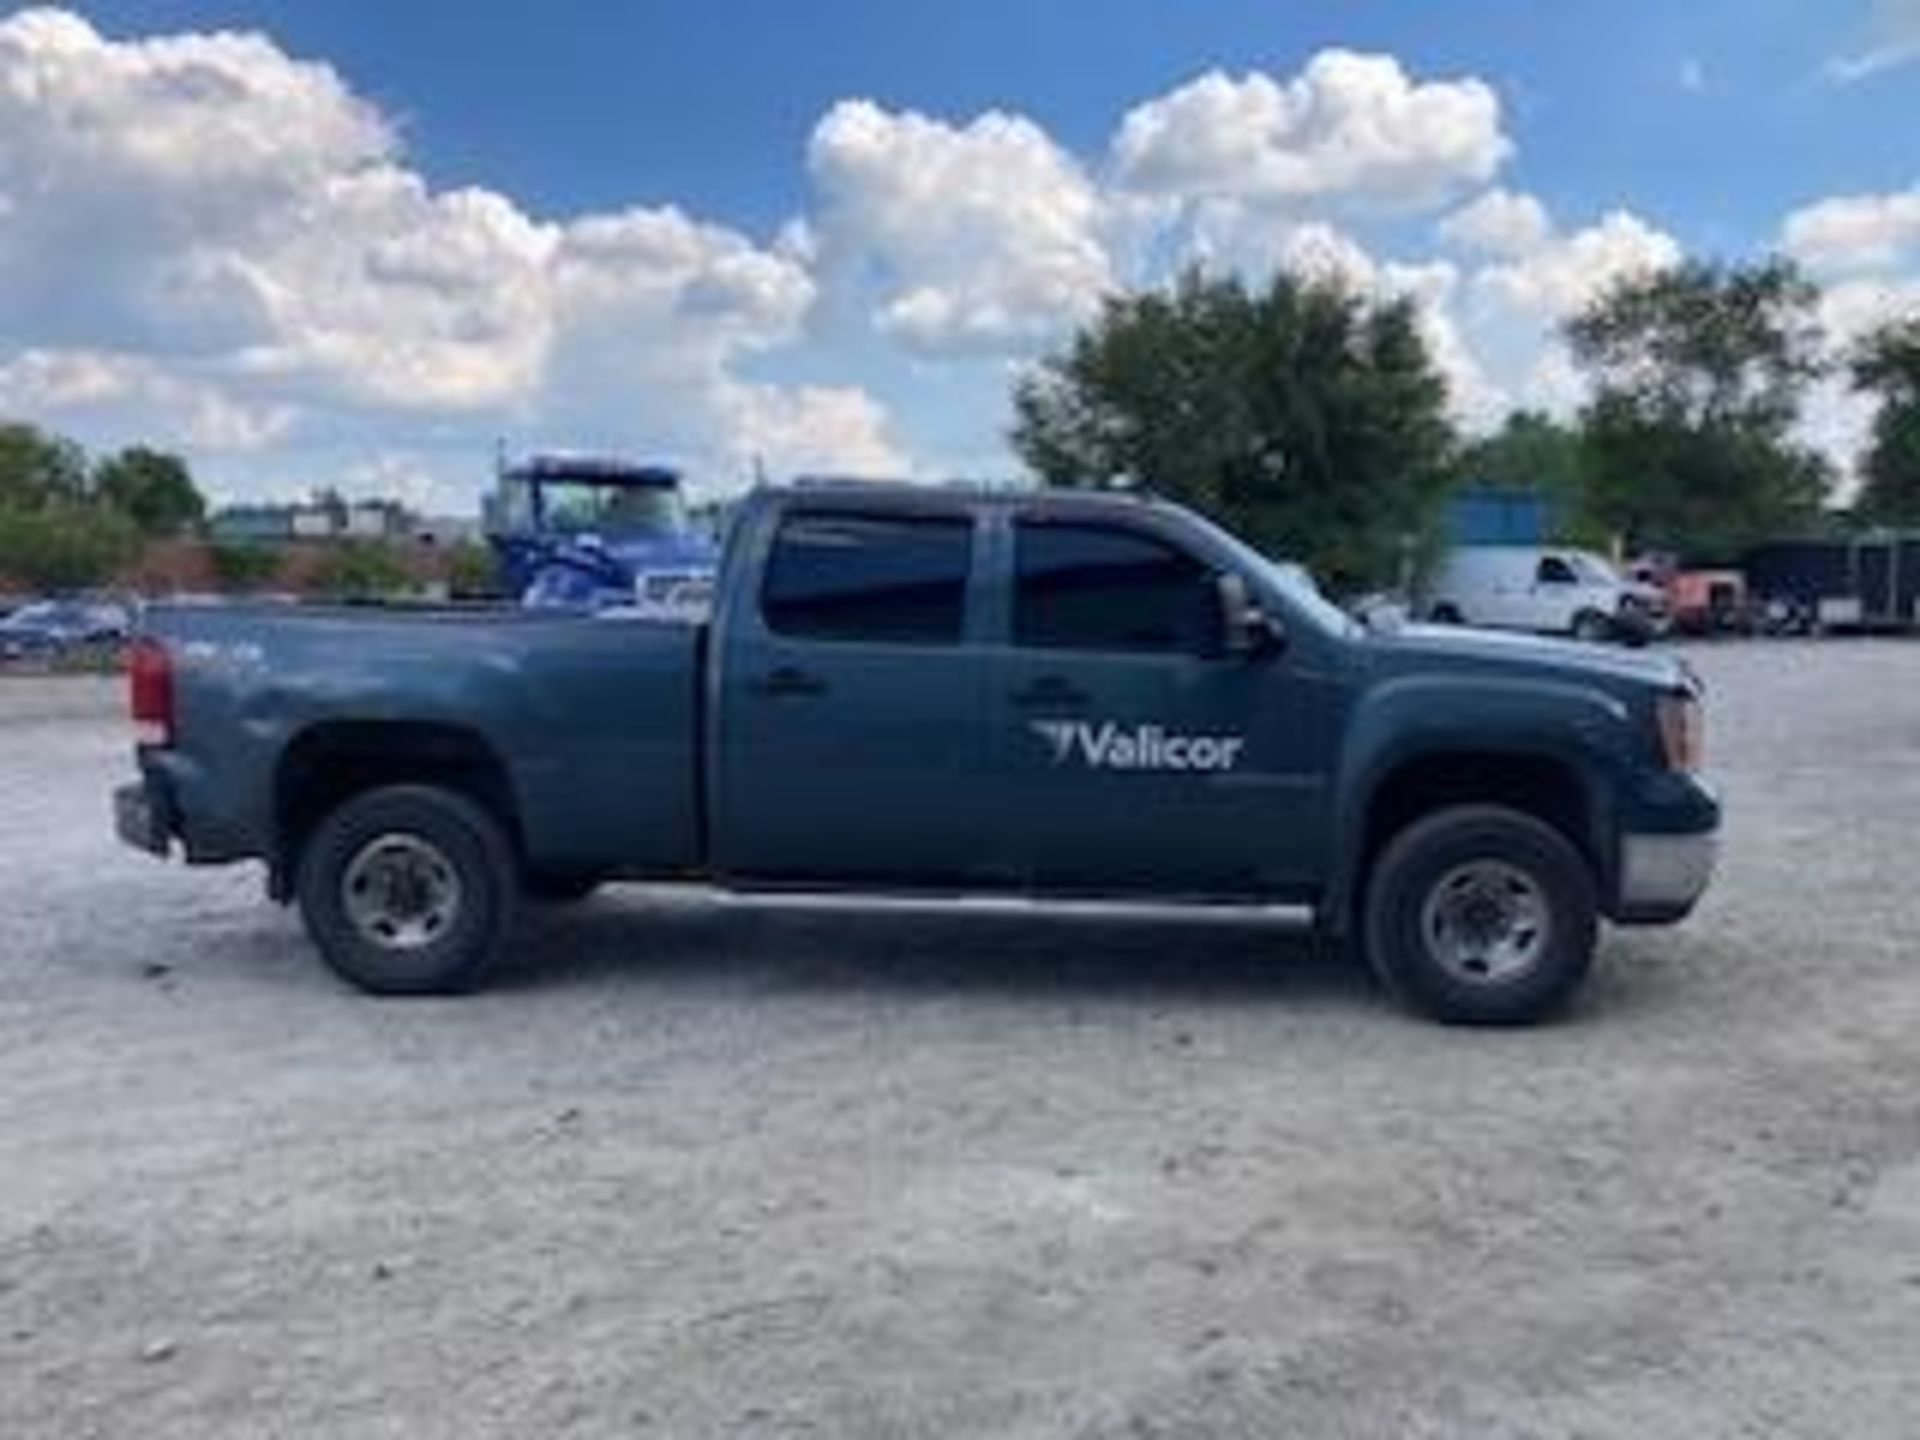 2008 GMC 2500, 6.0 GAS ENGINE, VIN 1GTHK23K08F209852, 232,491 MILES (LOCATED AT 2640 LEFFERSON ROAD - Image 4 of 4